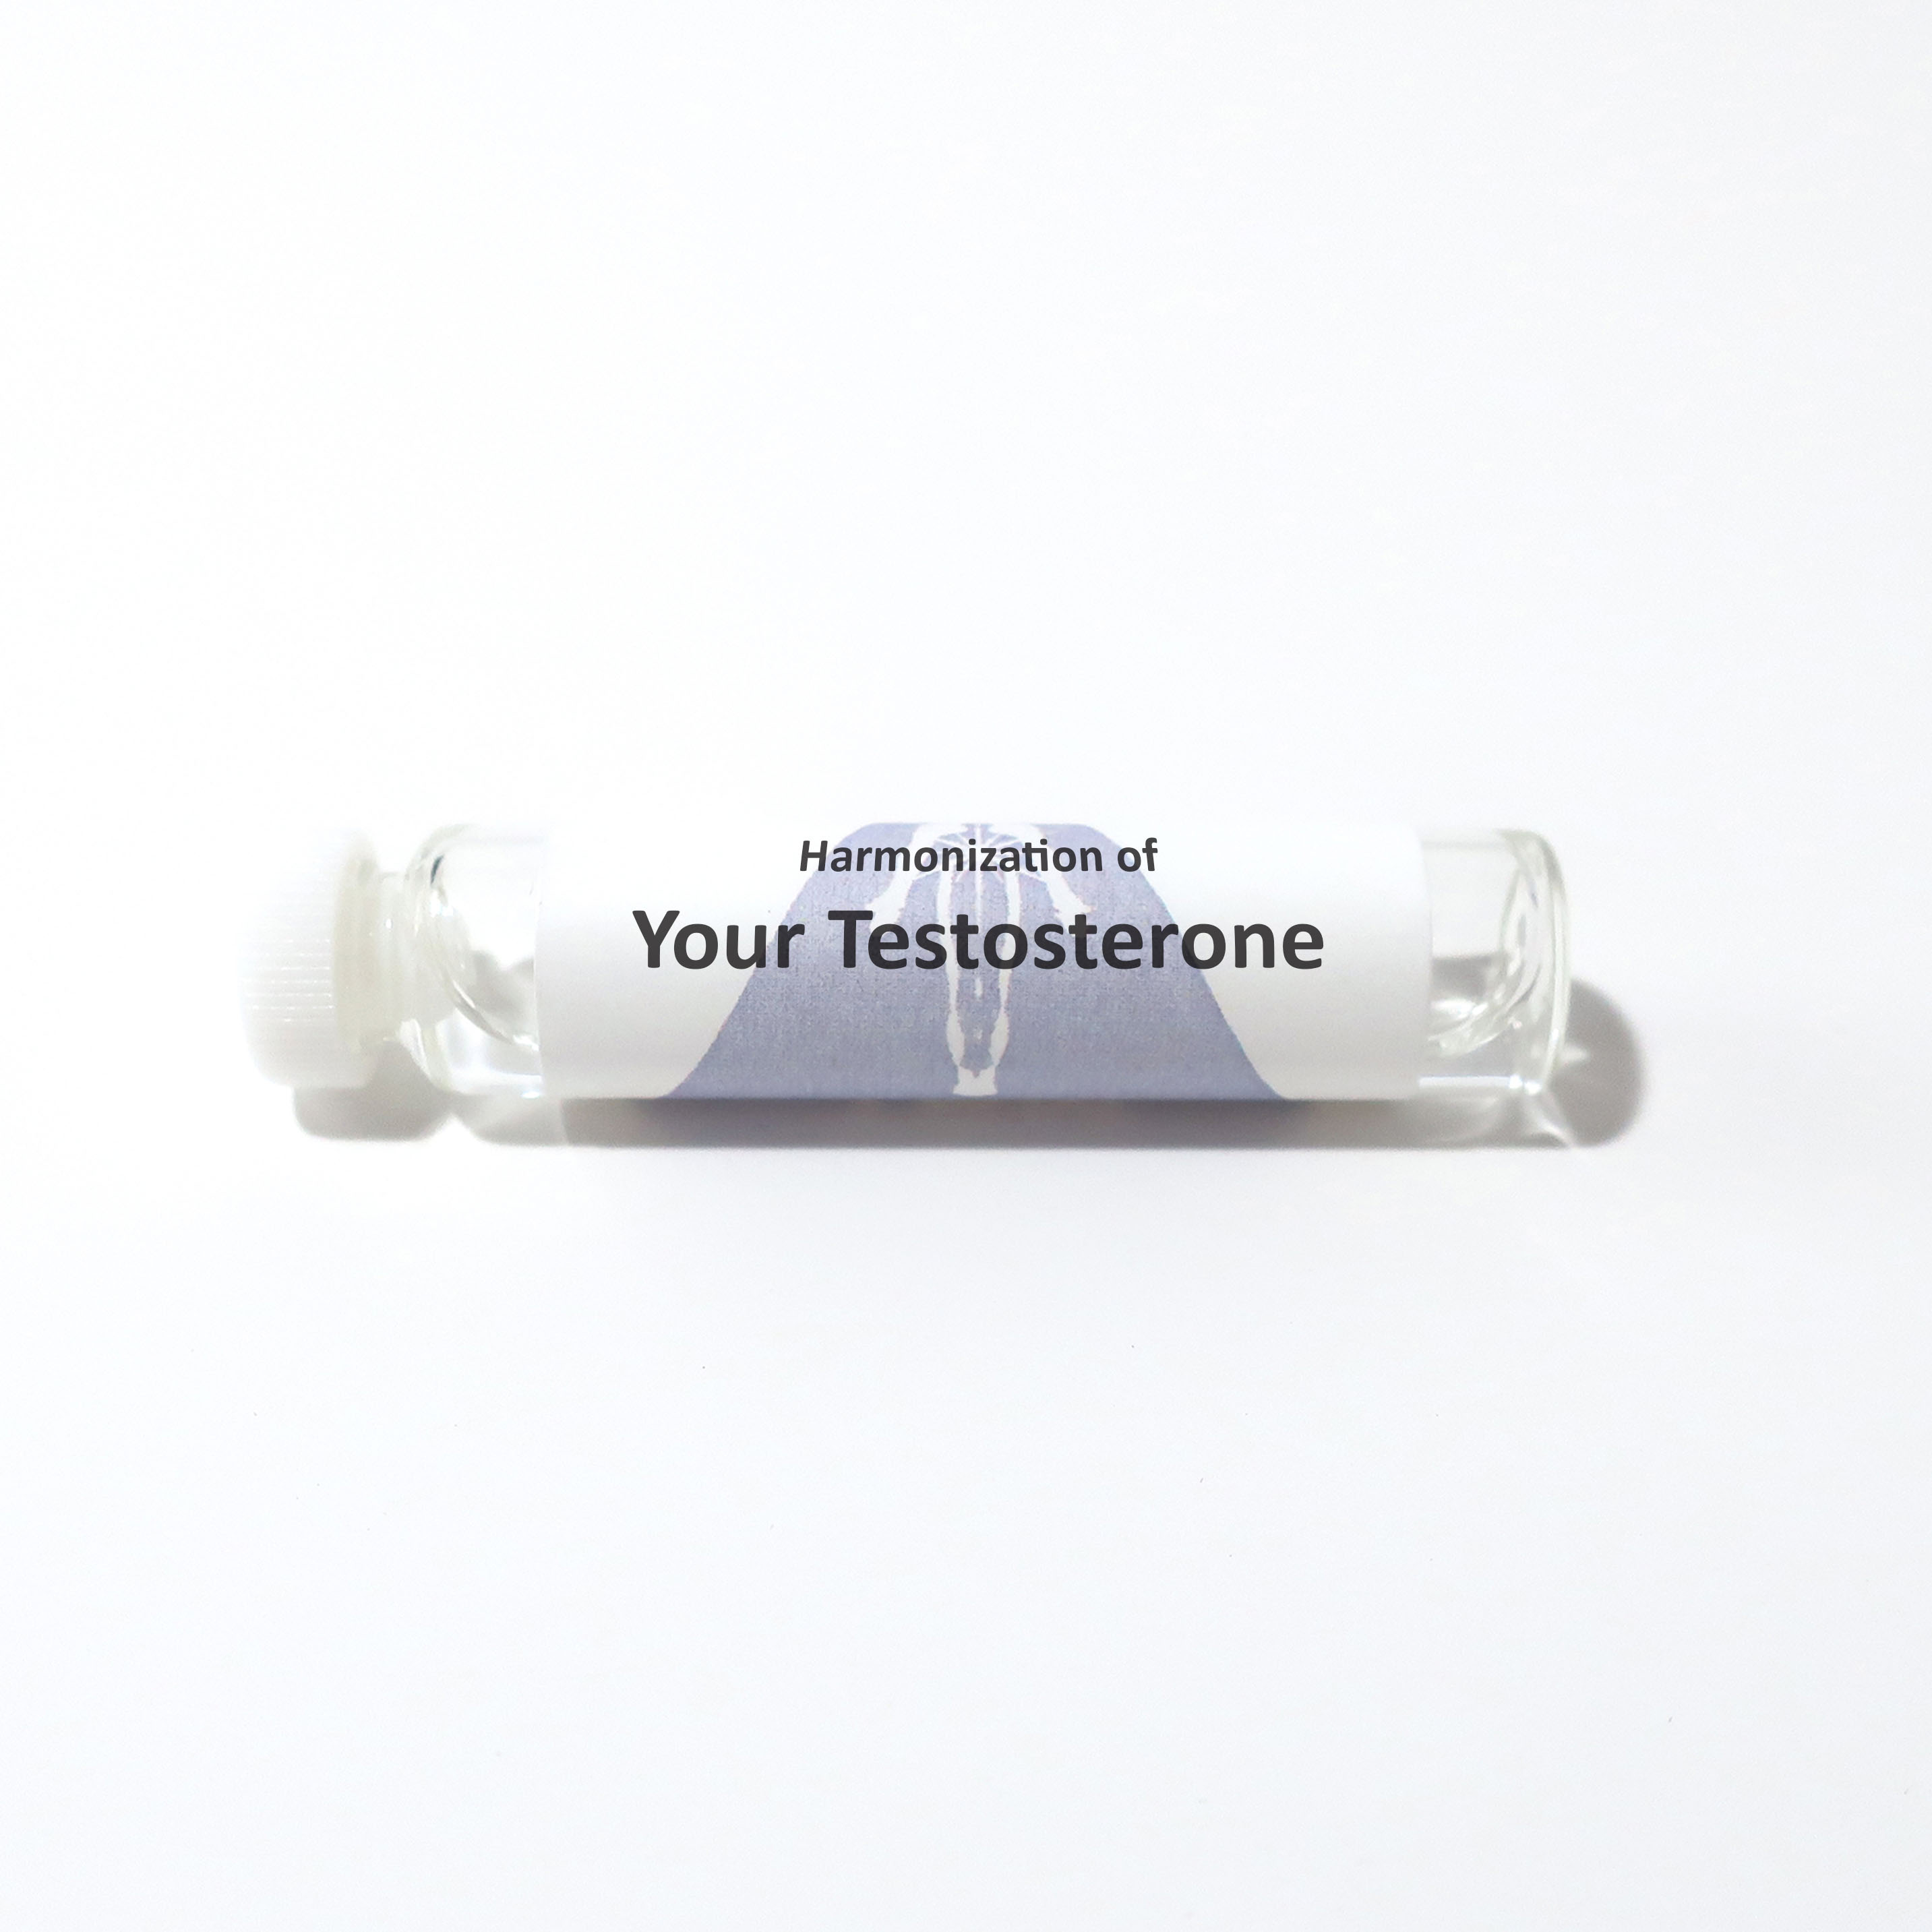 Your Testosterone